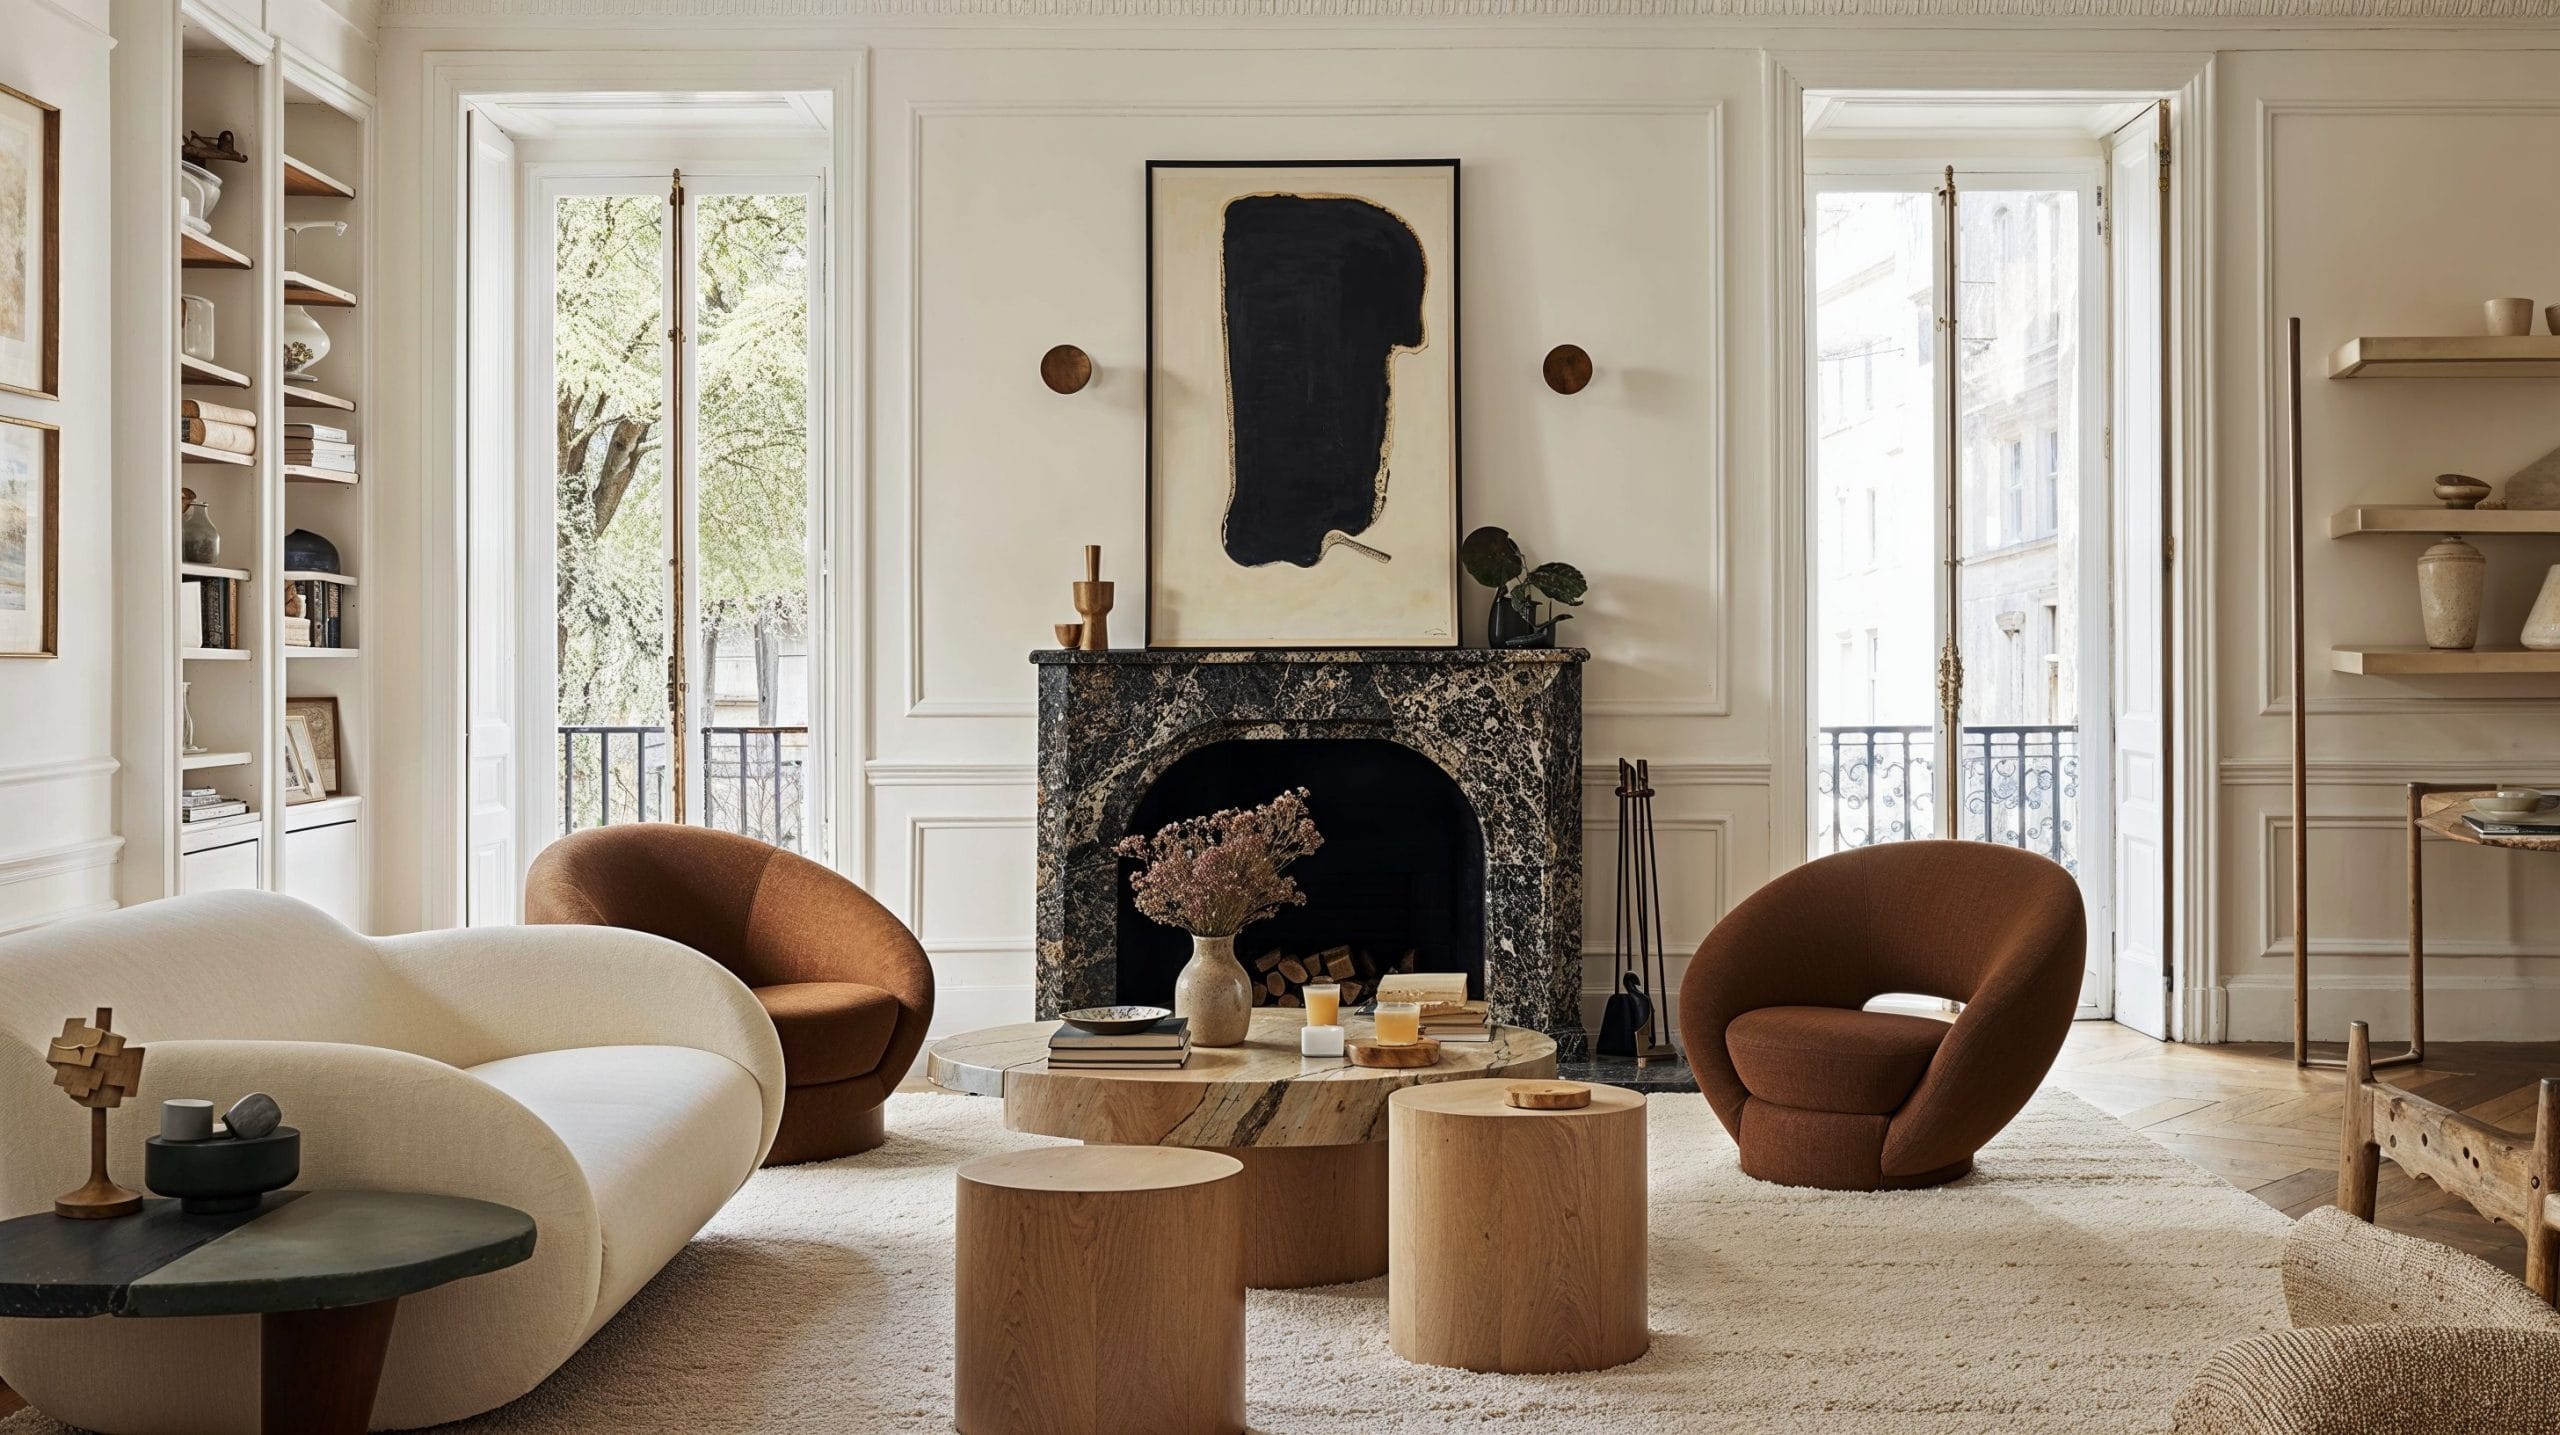 15 Best High-End Furniture Stores for a Luxe Interior